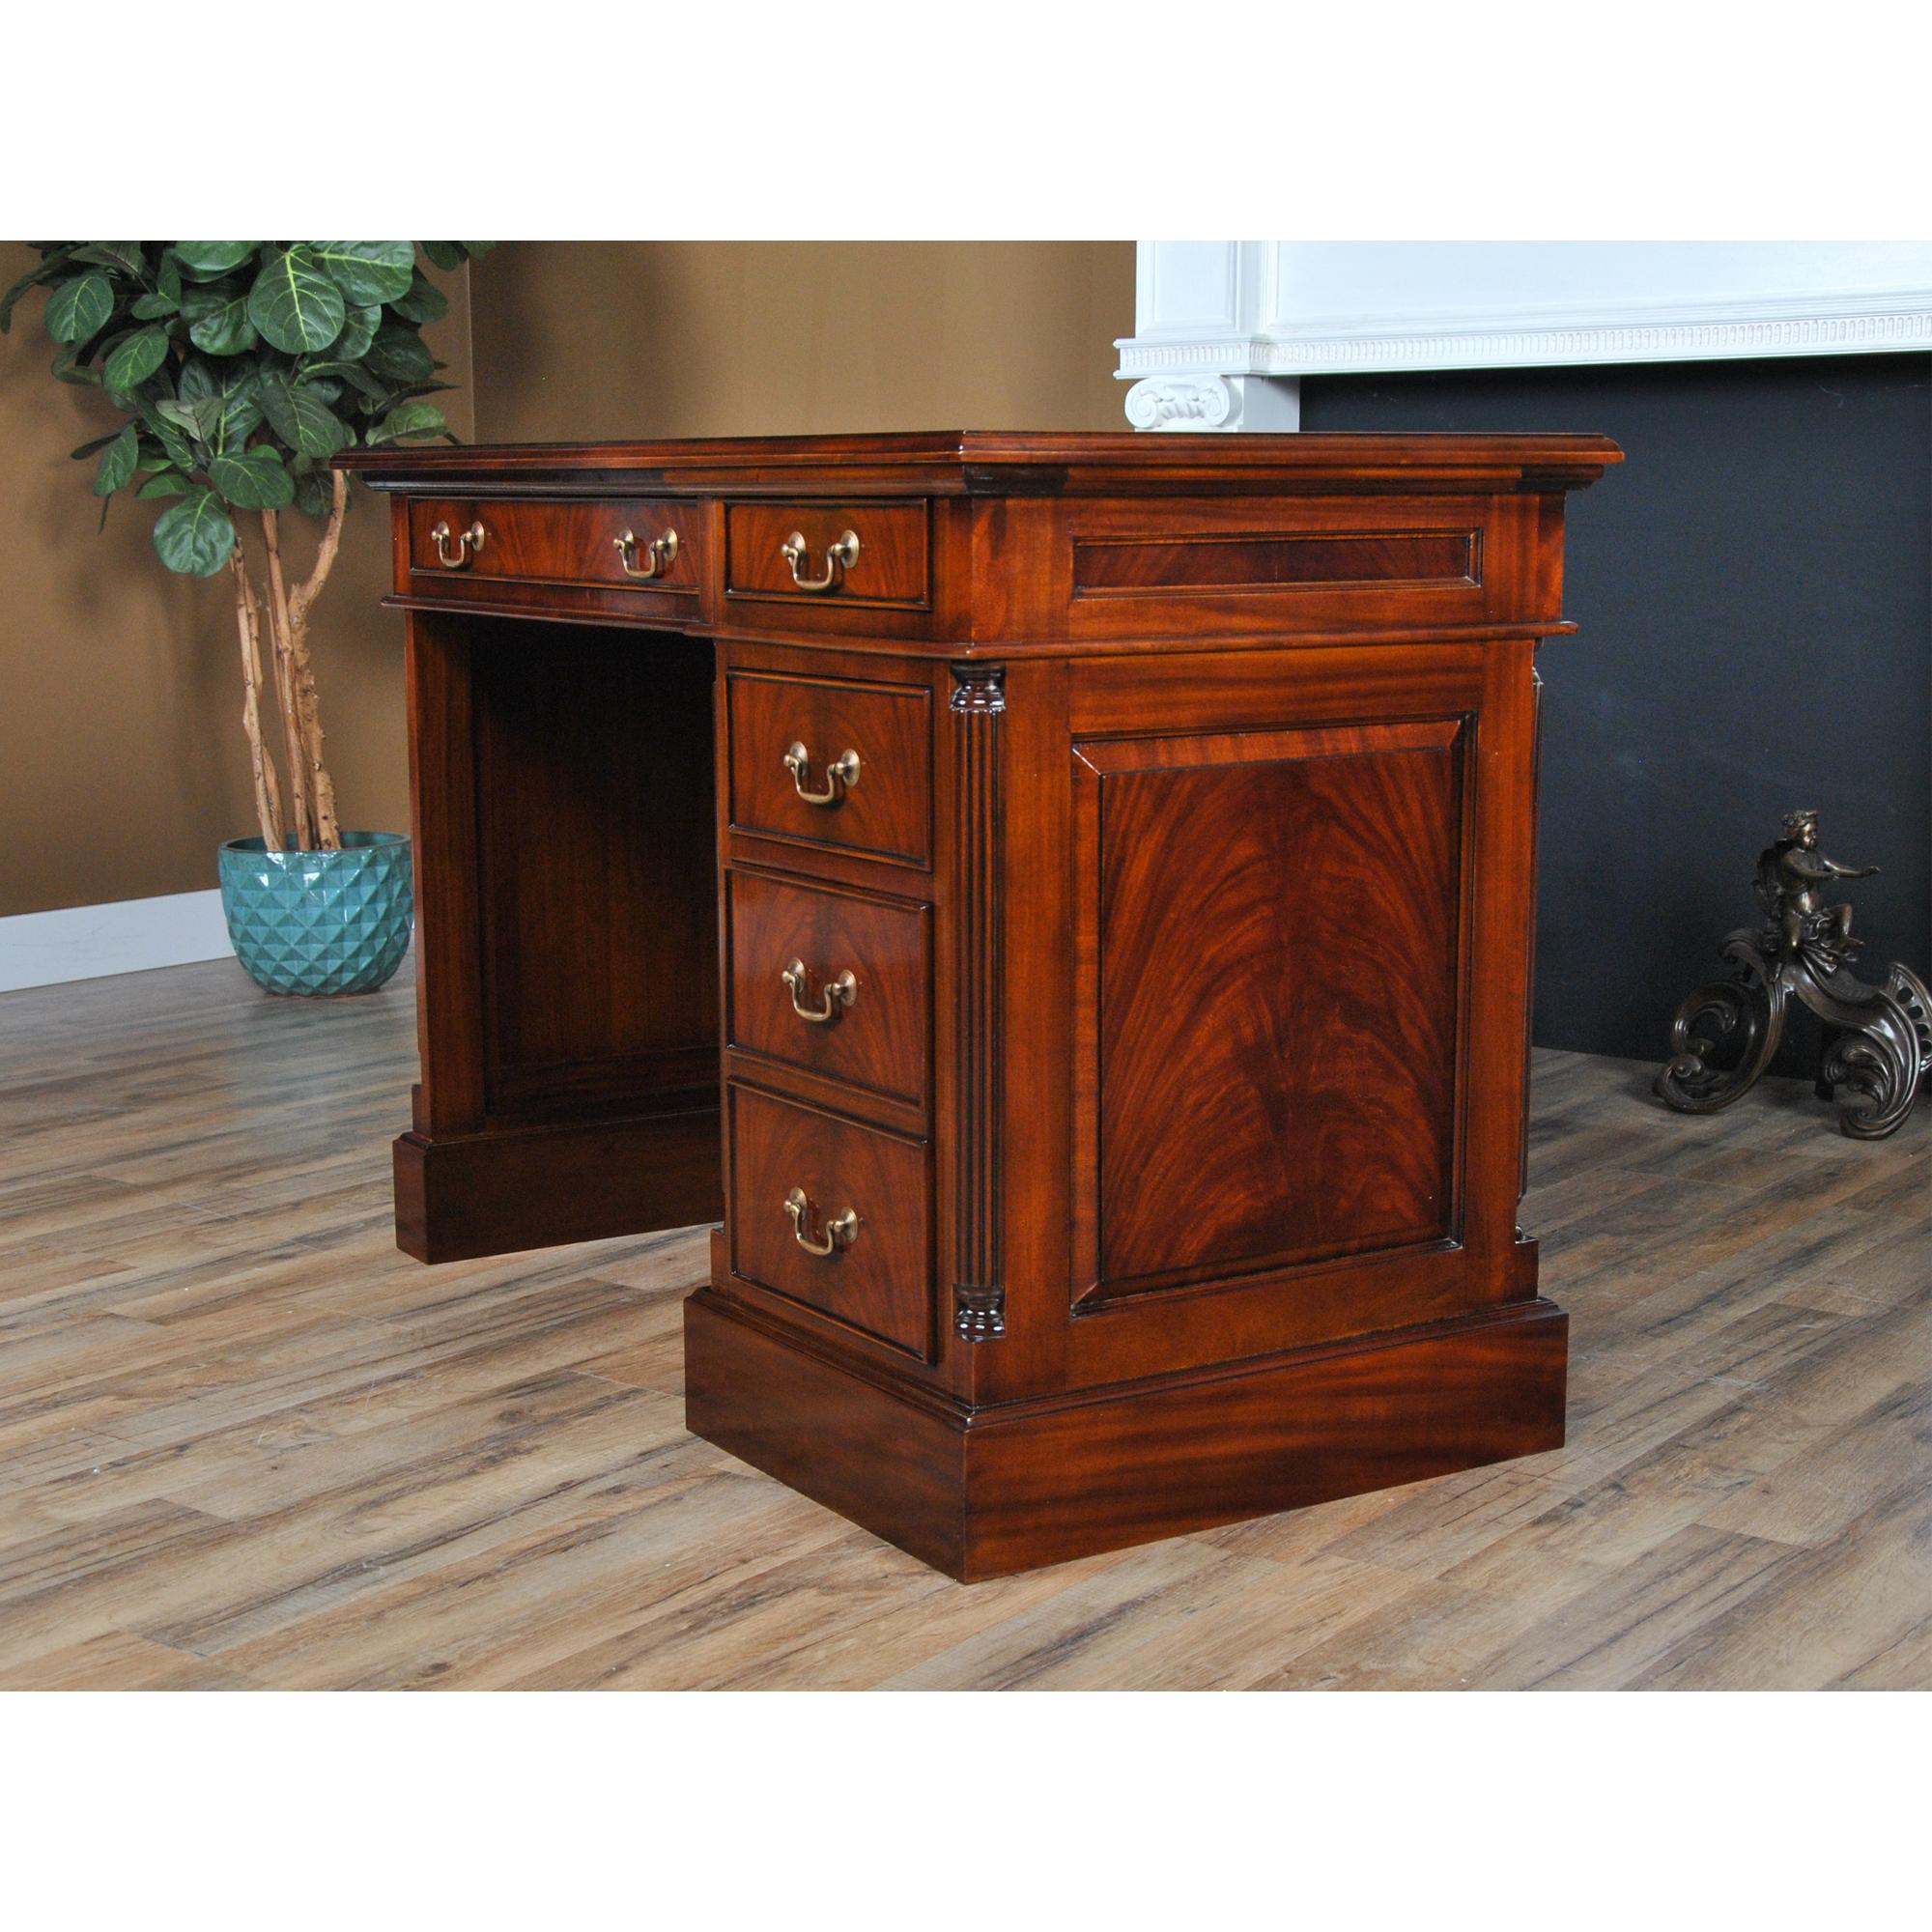 Mahogany Single Bank Desk In New Condition For Sale In Annville, PA